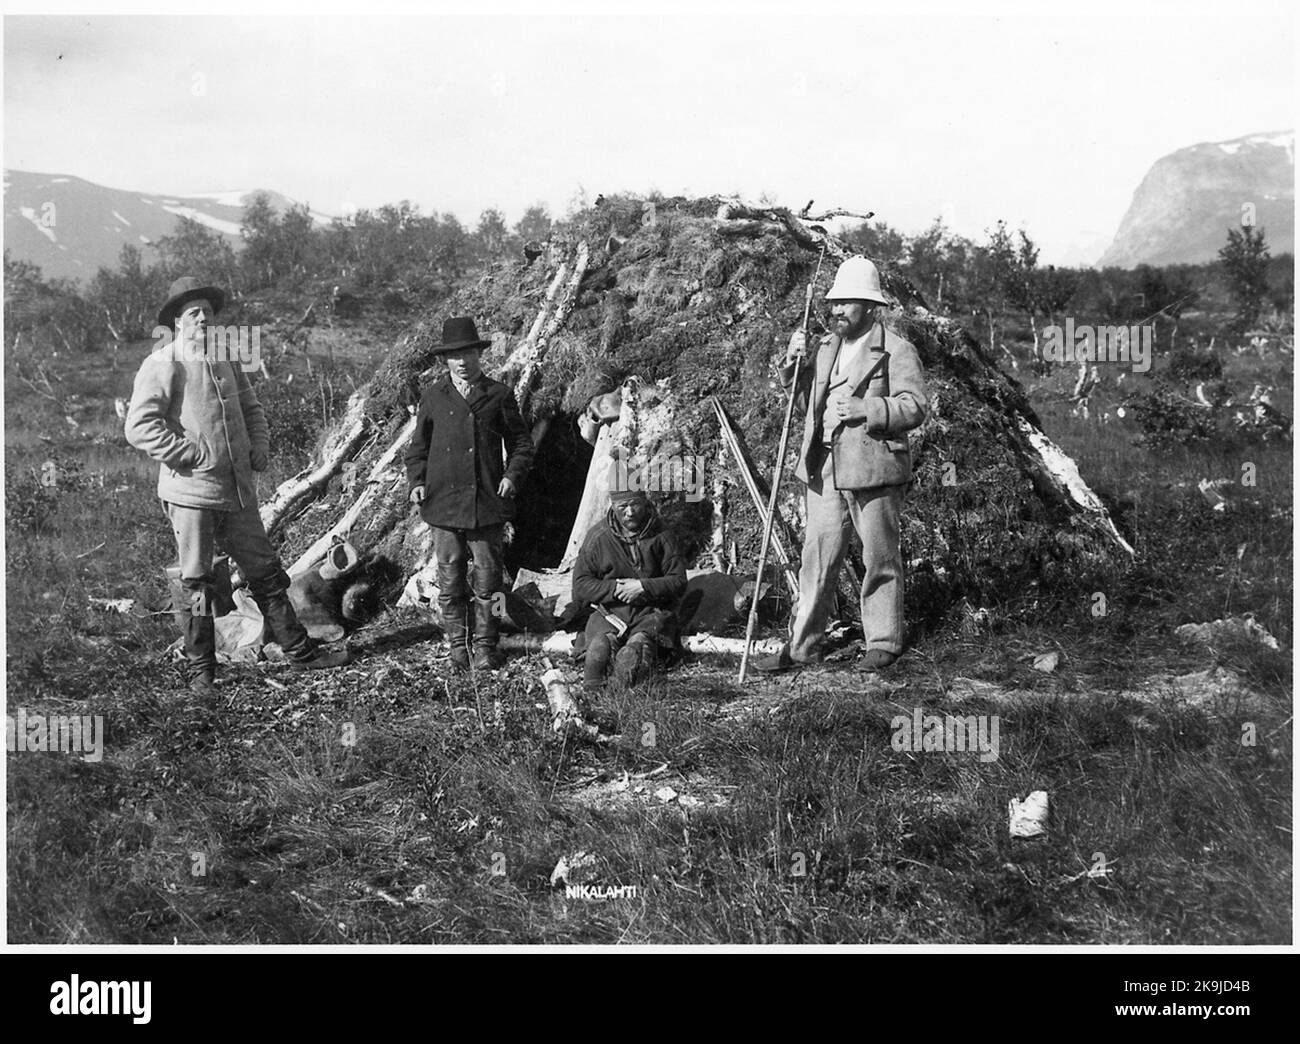 Station Inspector Karl Tirén at a joint camp near Nikkaluokta. Tirén is the man at the far right of the picture. Stock Photo